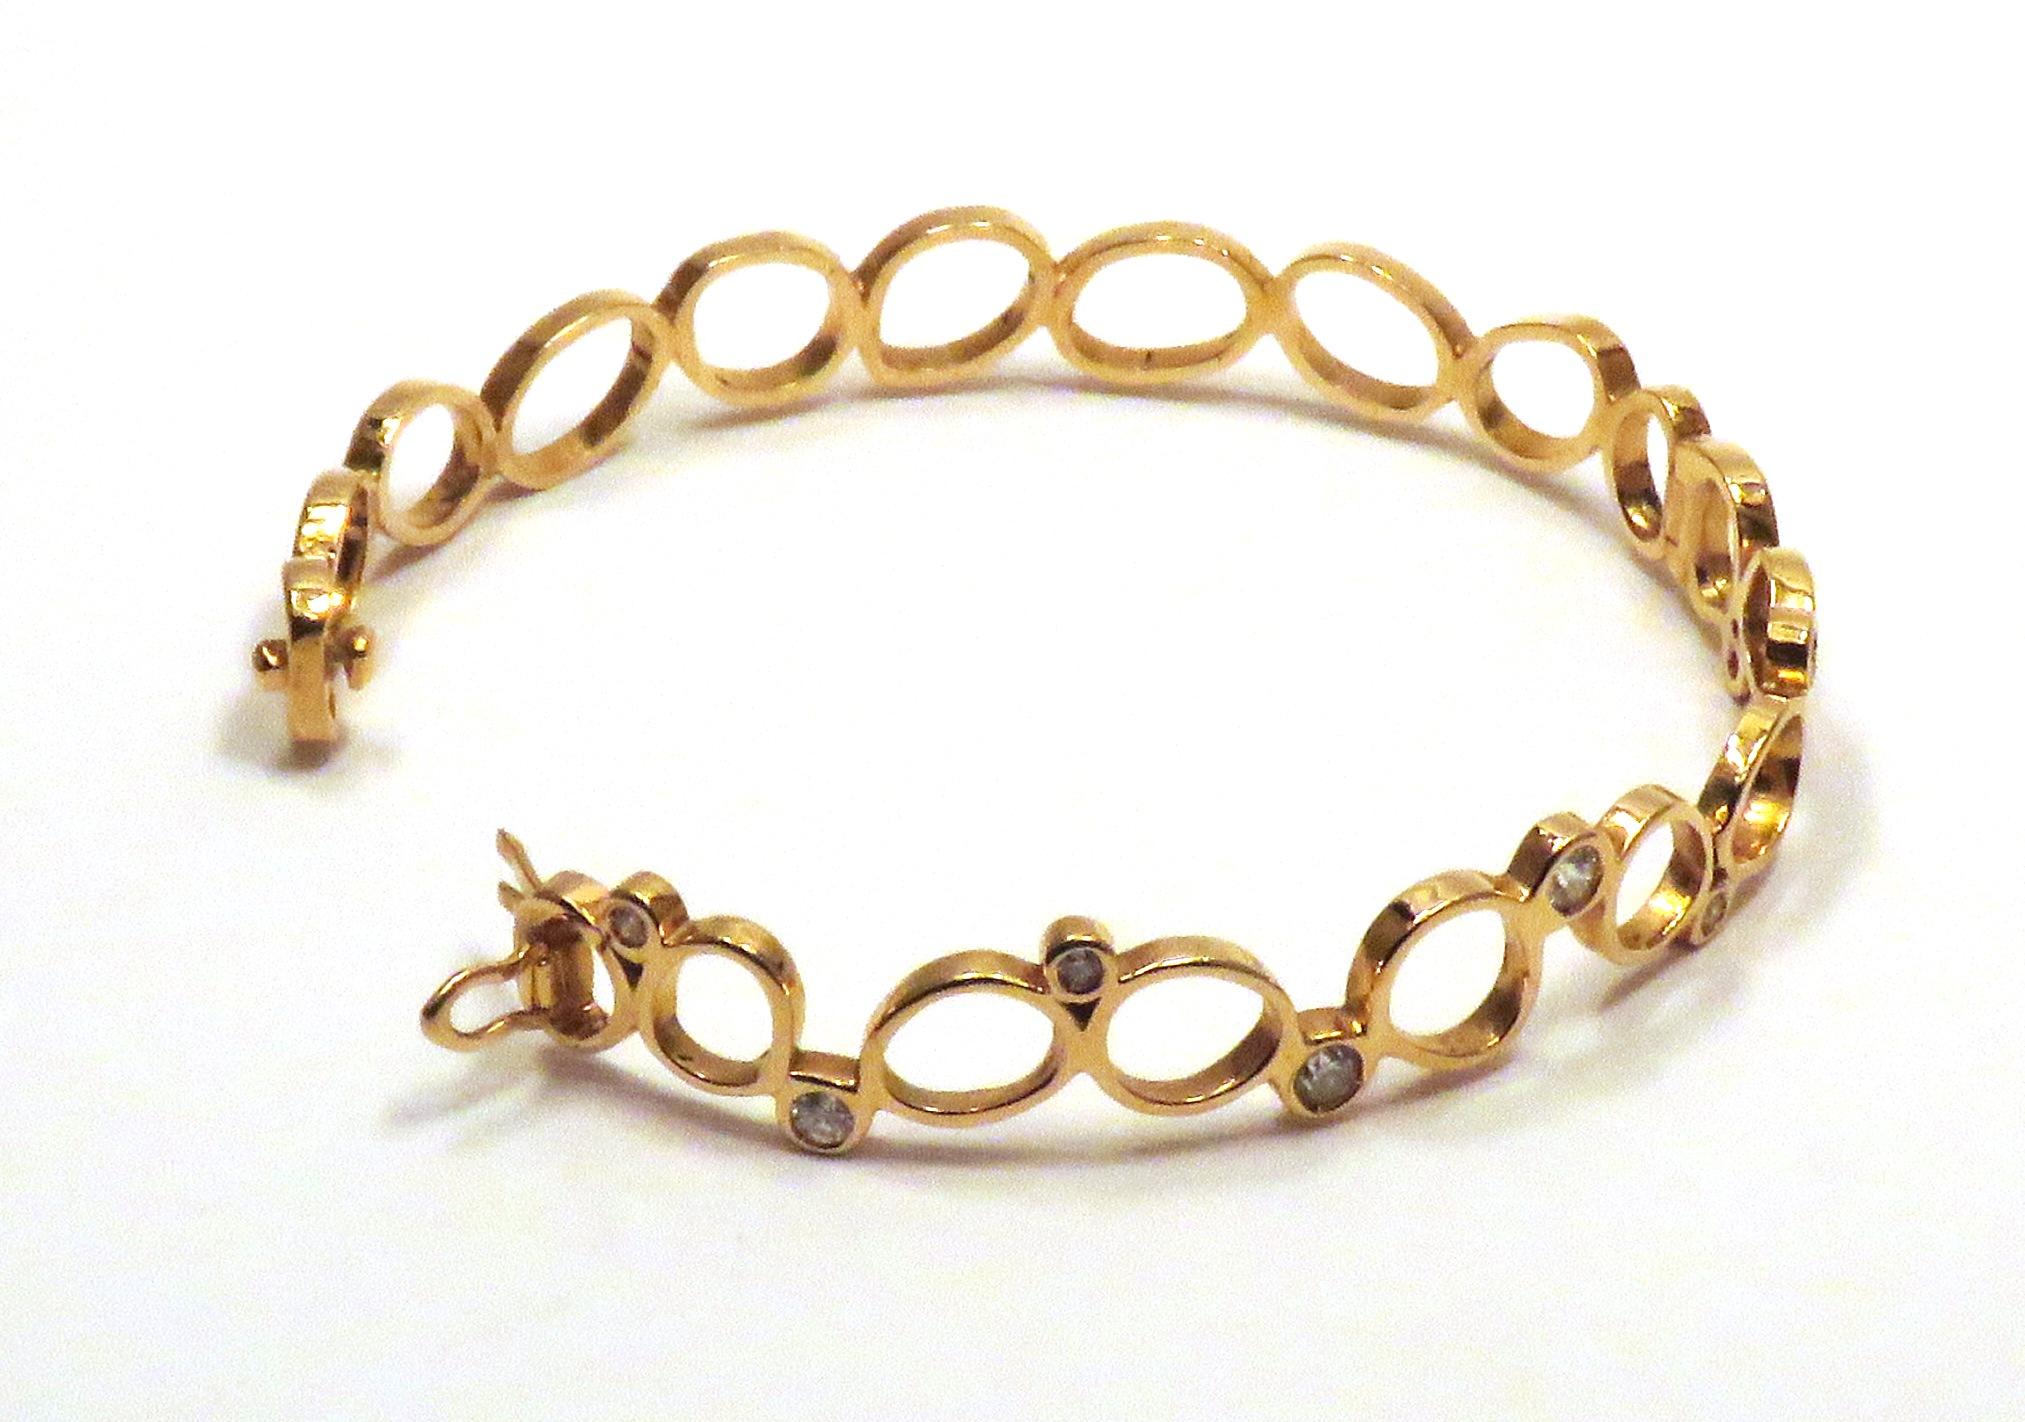 Brilliant Cut Rose Gold Diamonds Bracelet Hand Crafted in Italy by Botta Gioielli